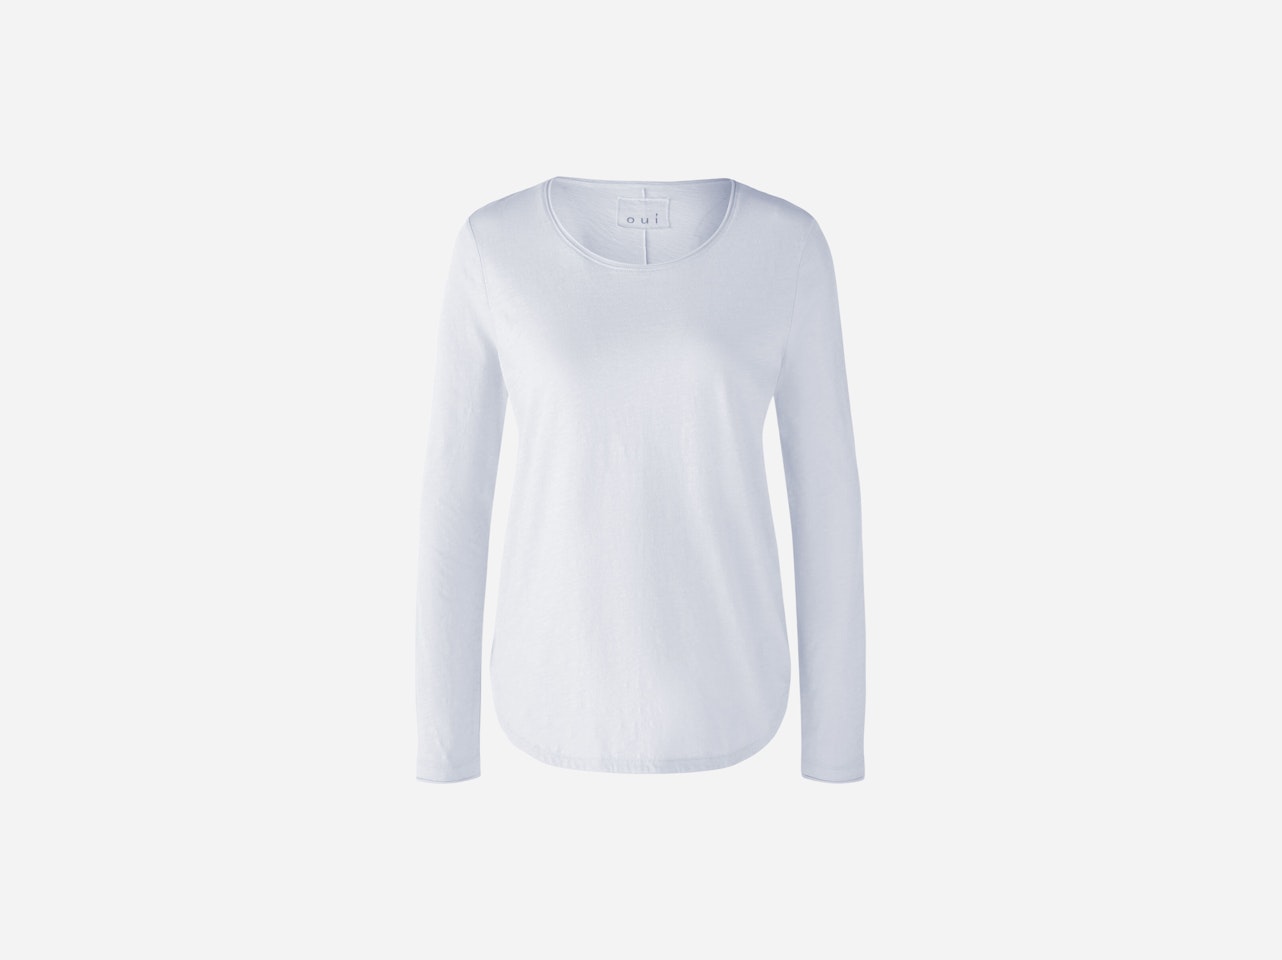 Bild 1 von Long-sleeved shirt made from soft flamé fabric in optic white | Oui